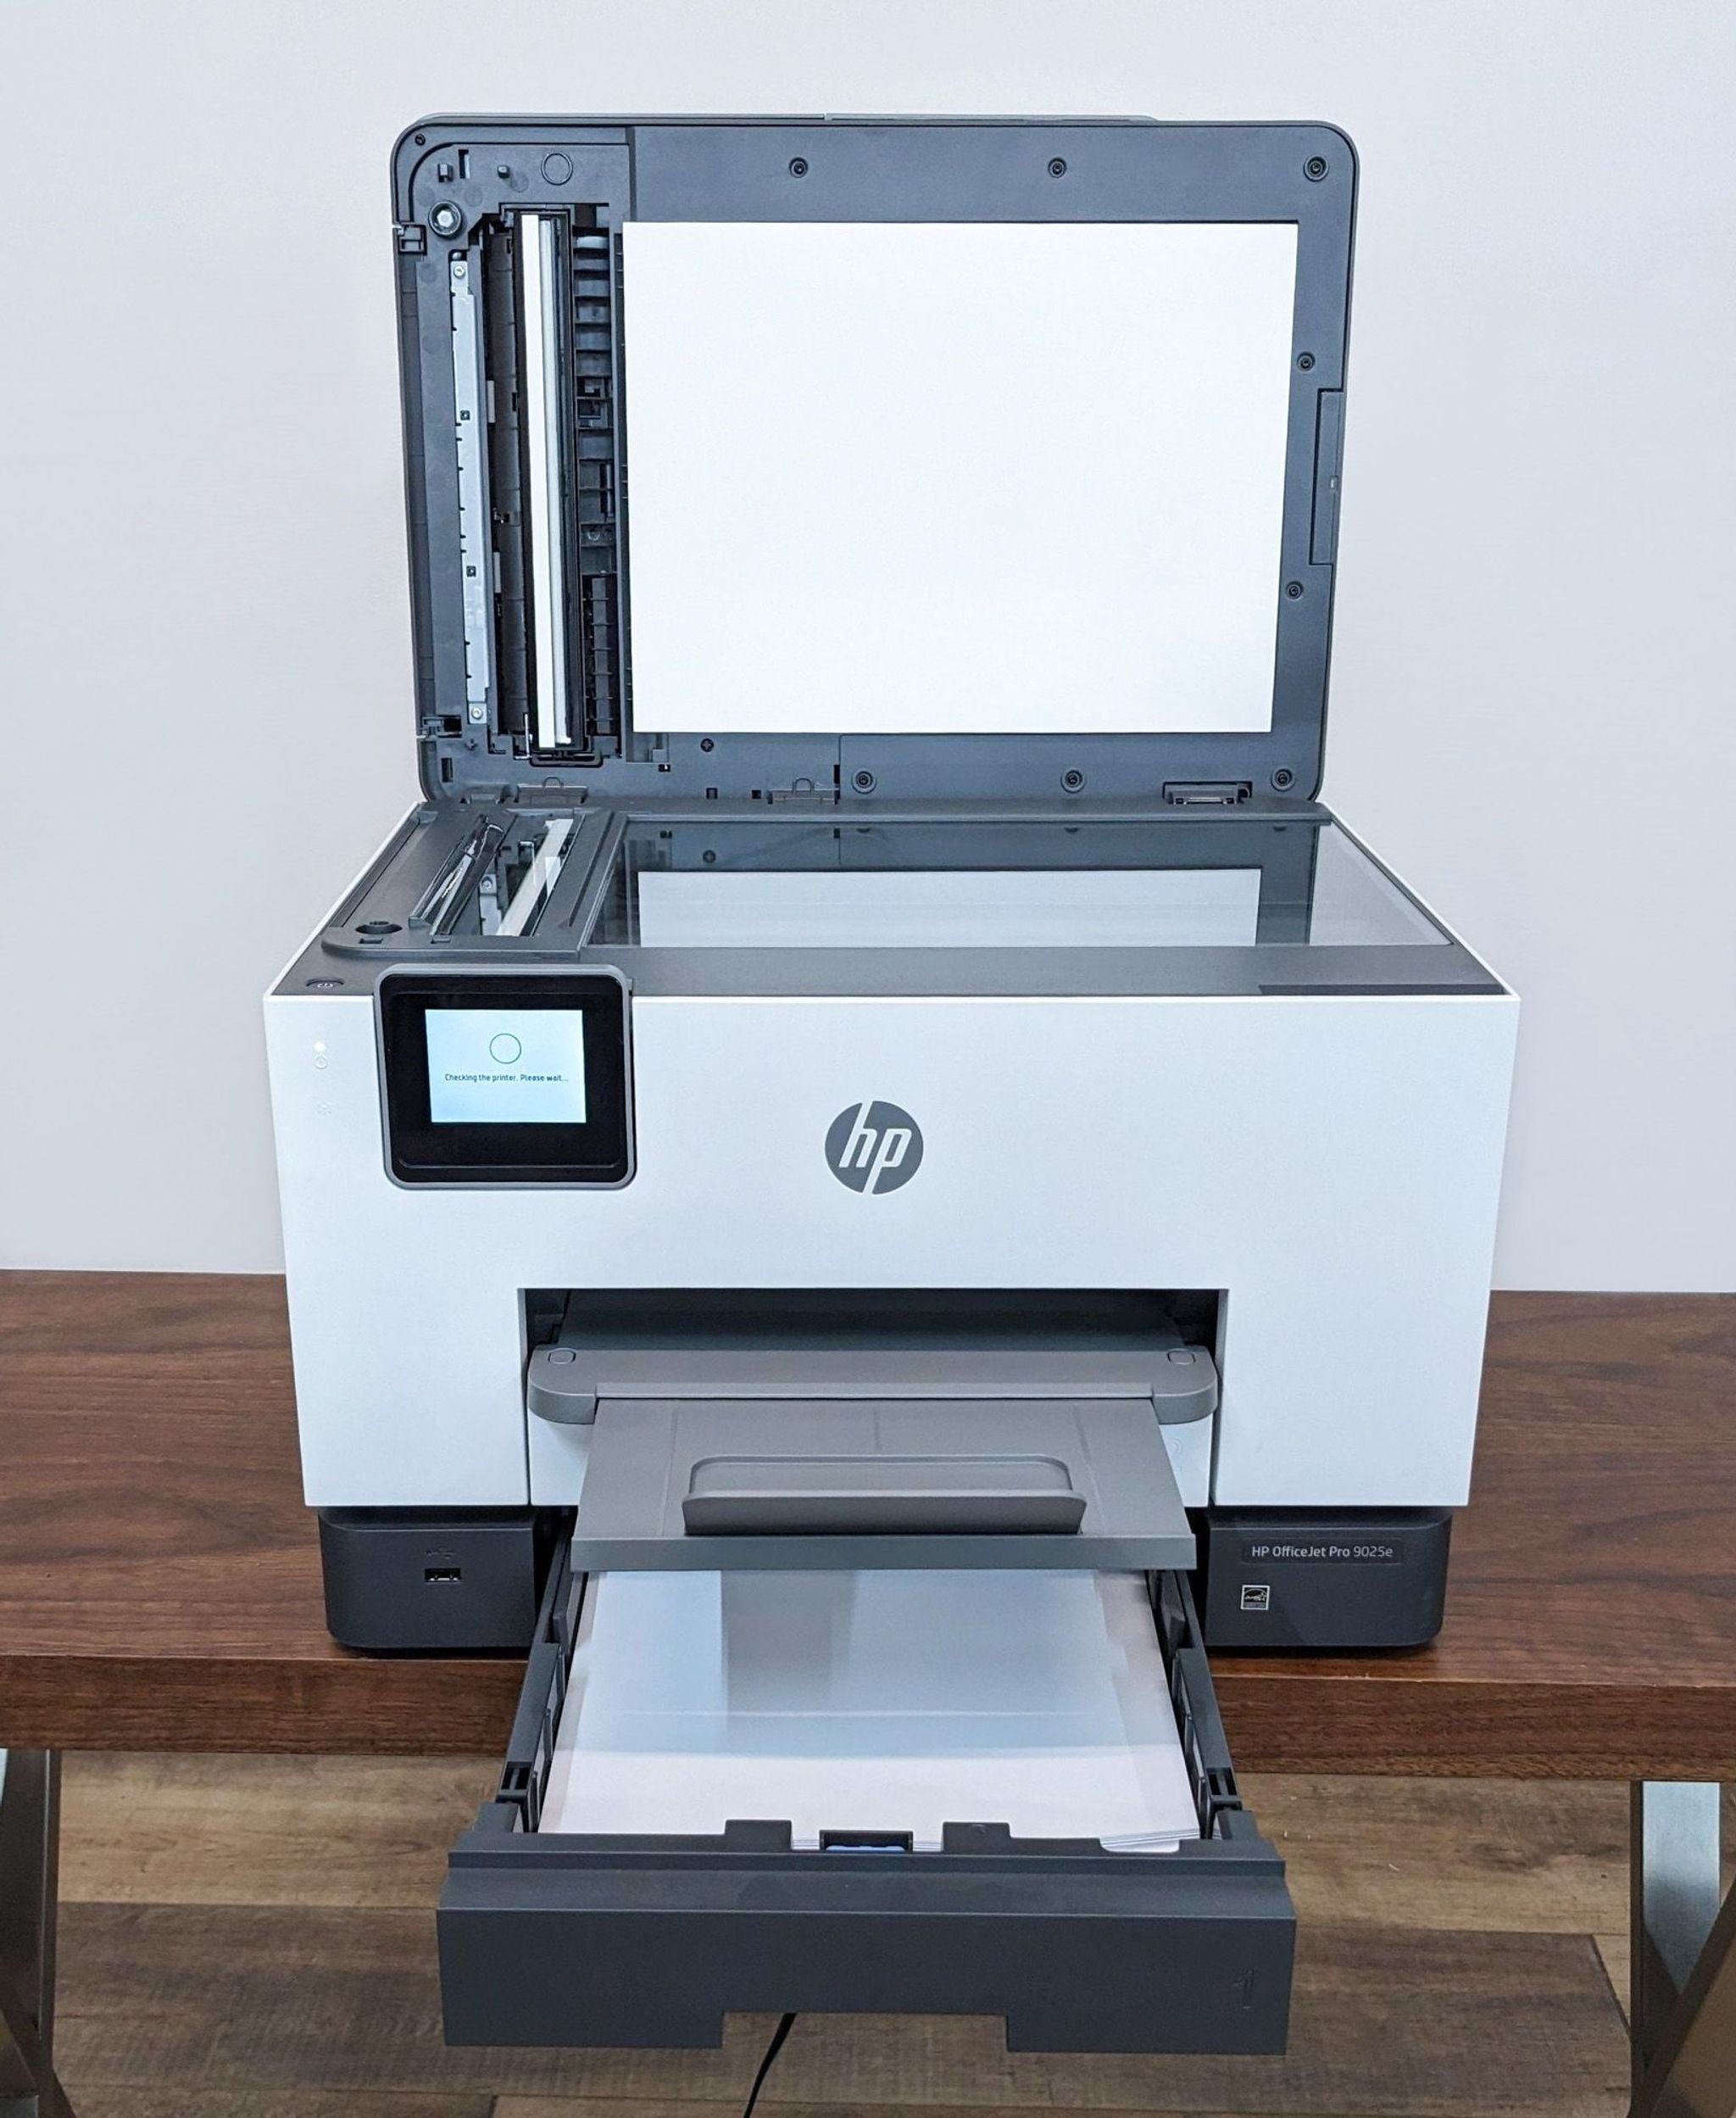 HP All-in-One printer open, showing scanning bed and paper tray, with touch screen interface for easy navigation.